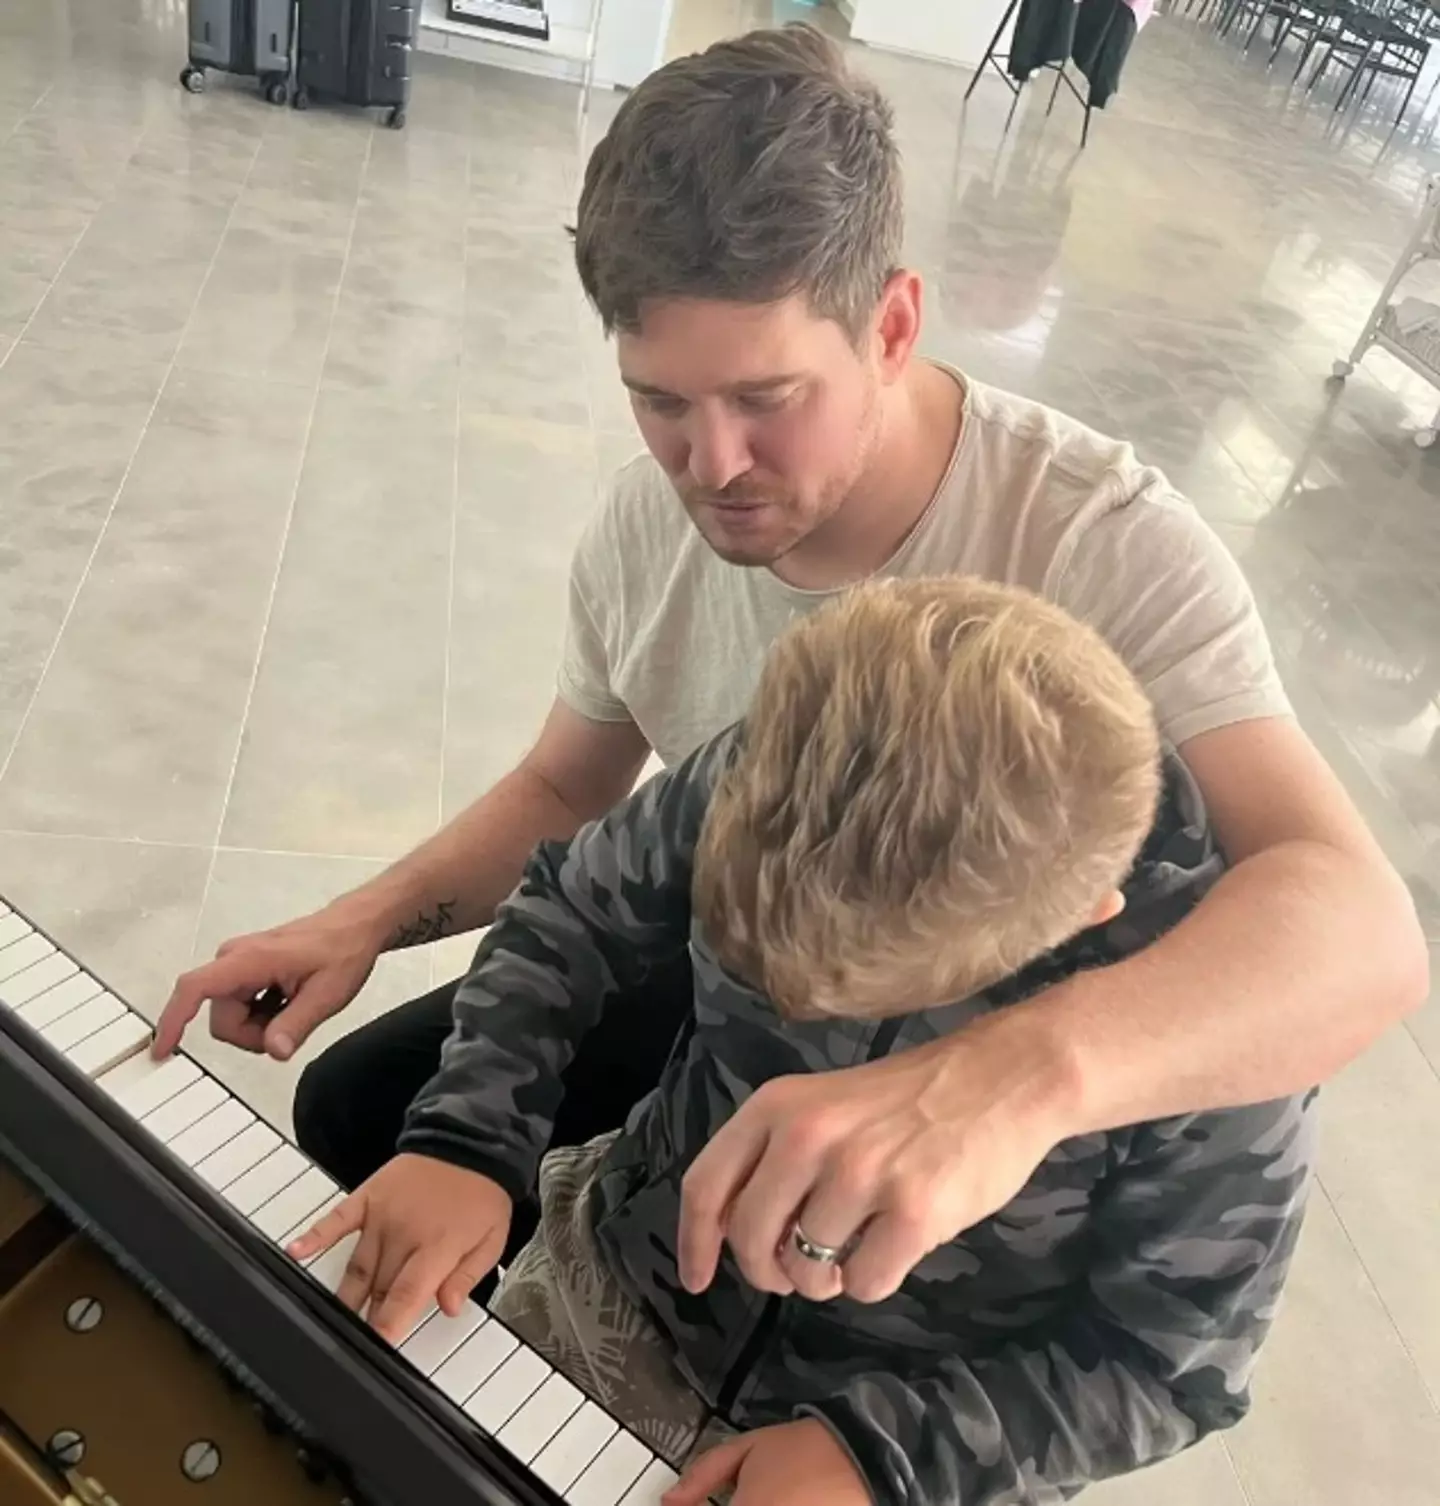 Michael Bublé has opened up about the way his son's cancer diagnosis changed him.